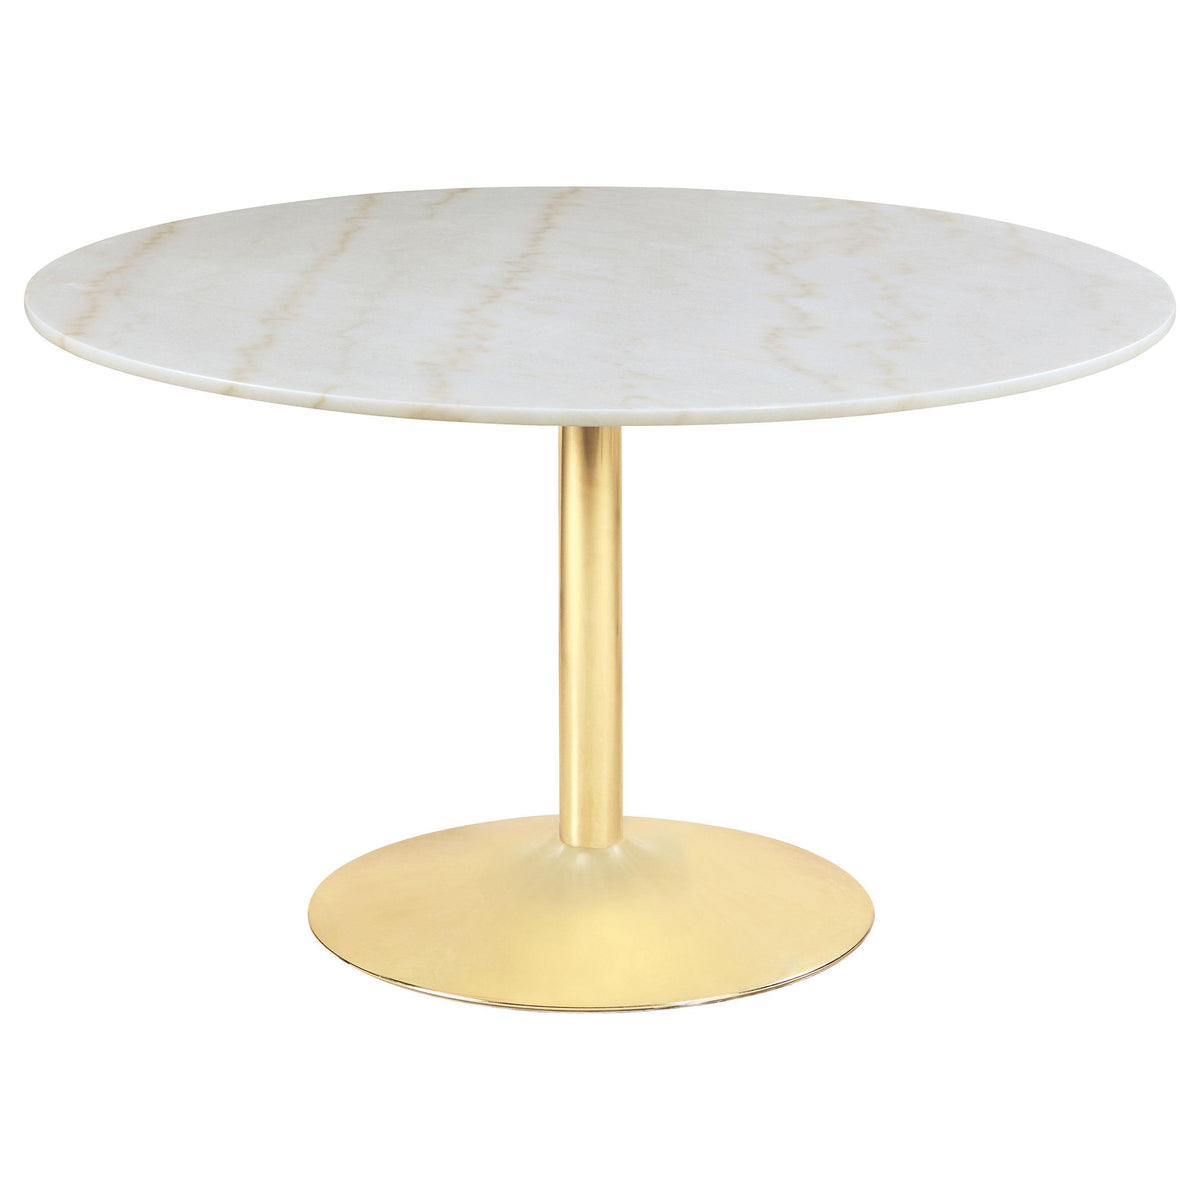 Kella Round Marble Top Dining Table White and Gold Kella Round Marble Top Dining Table White and Gold Half Price Furniture